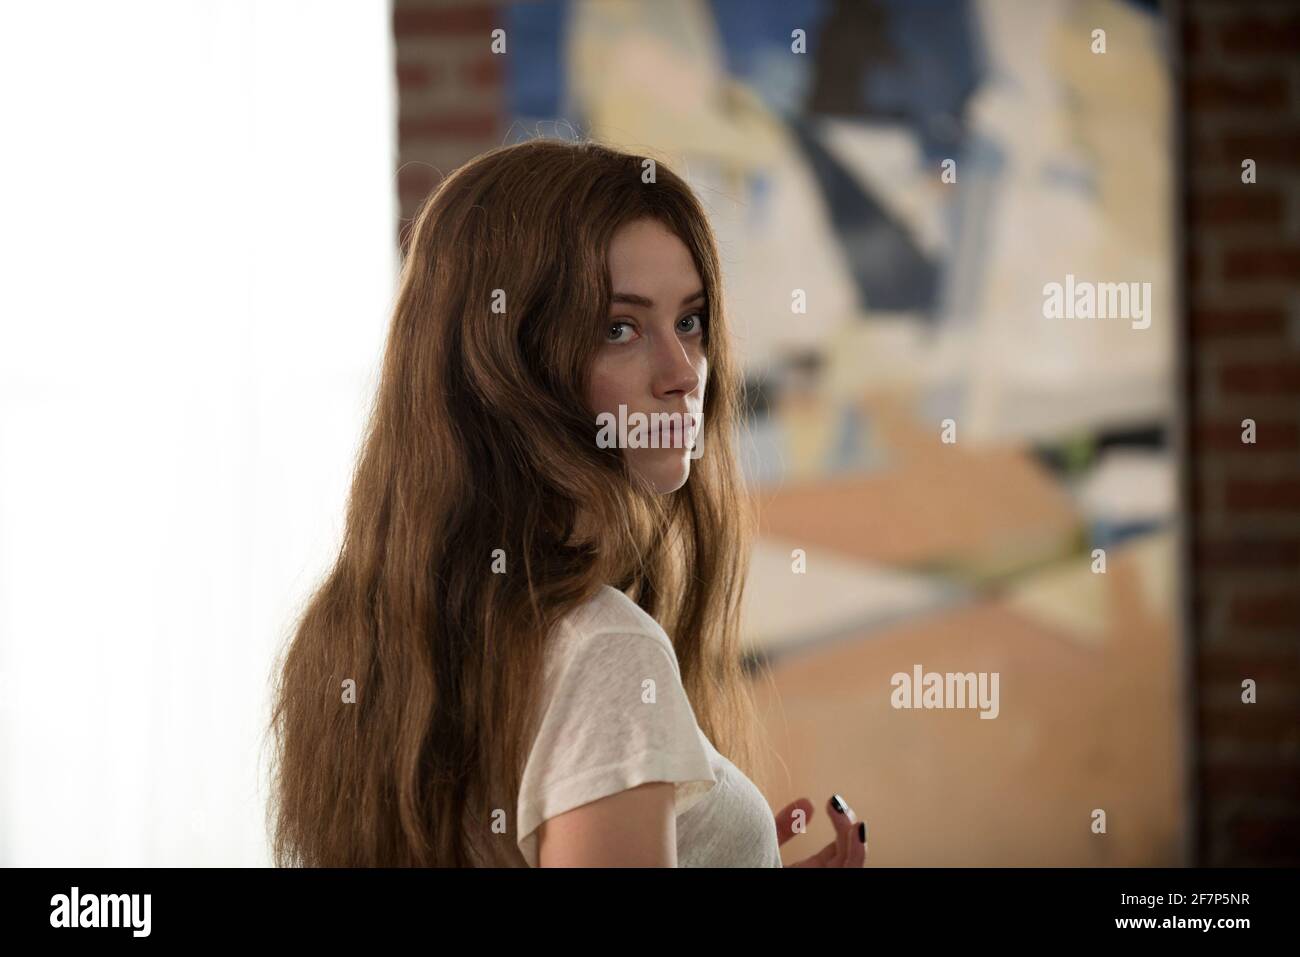 AMBER HEARD in THE ADDERALL DIARIES (2015), directed by PAMELA ROMANOWSKY. Credit: RABBITBANDINI PRODUCTIONS / Album Stock Photo